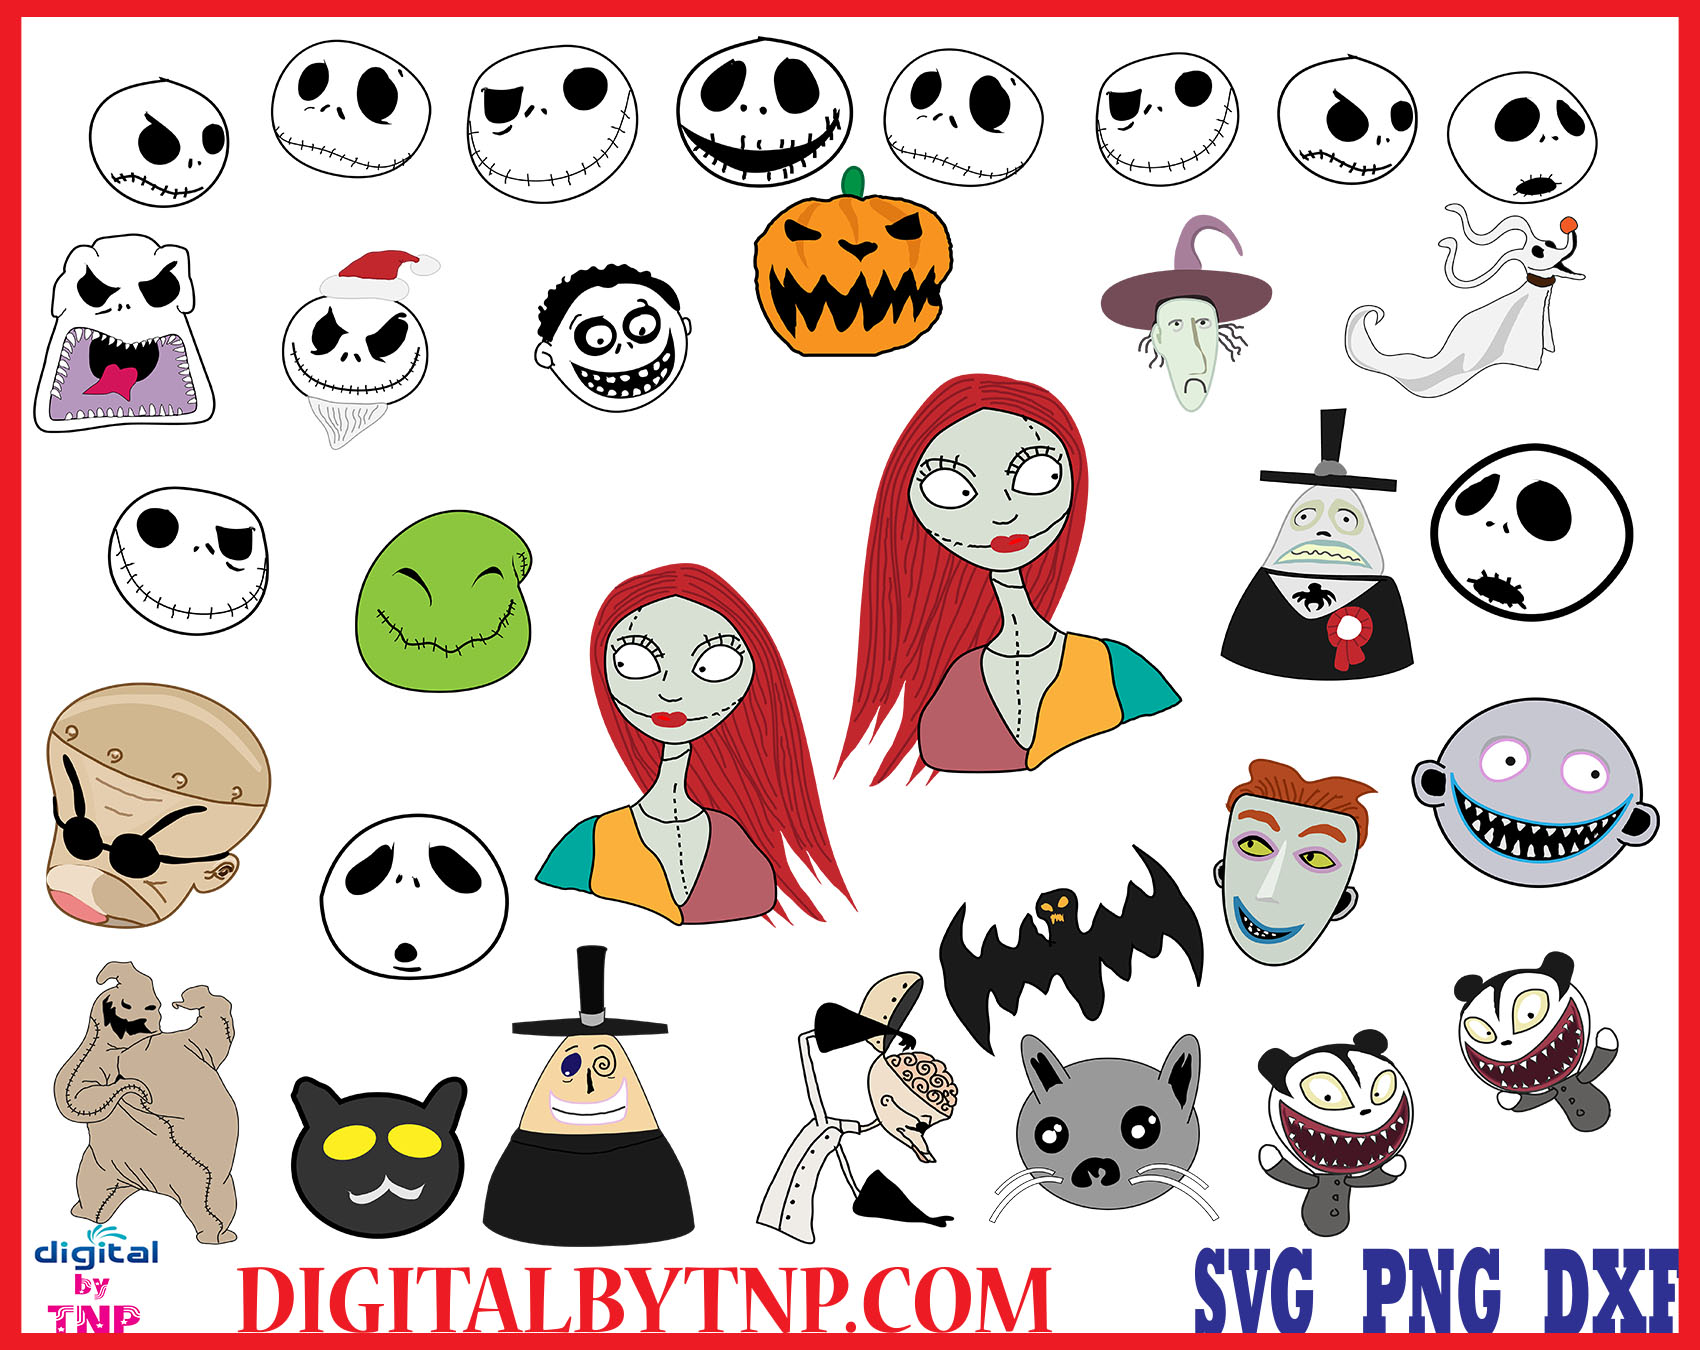 Download Svg Files Nightmare Before Christmas